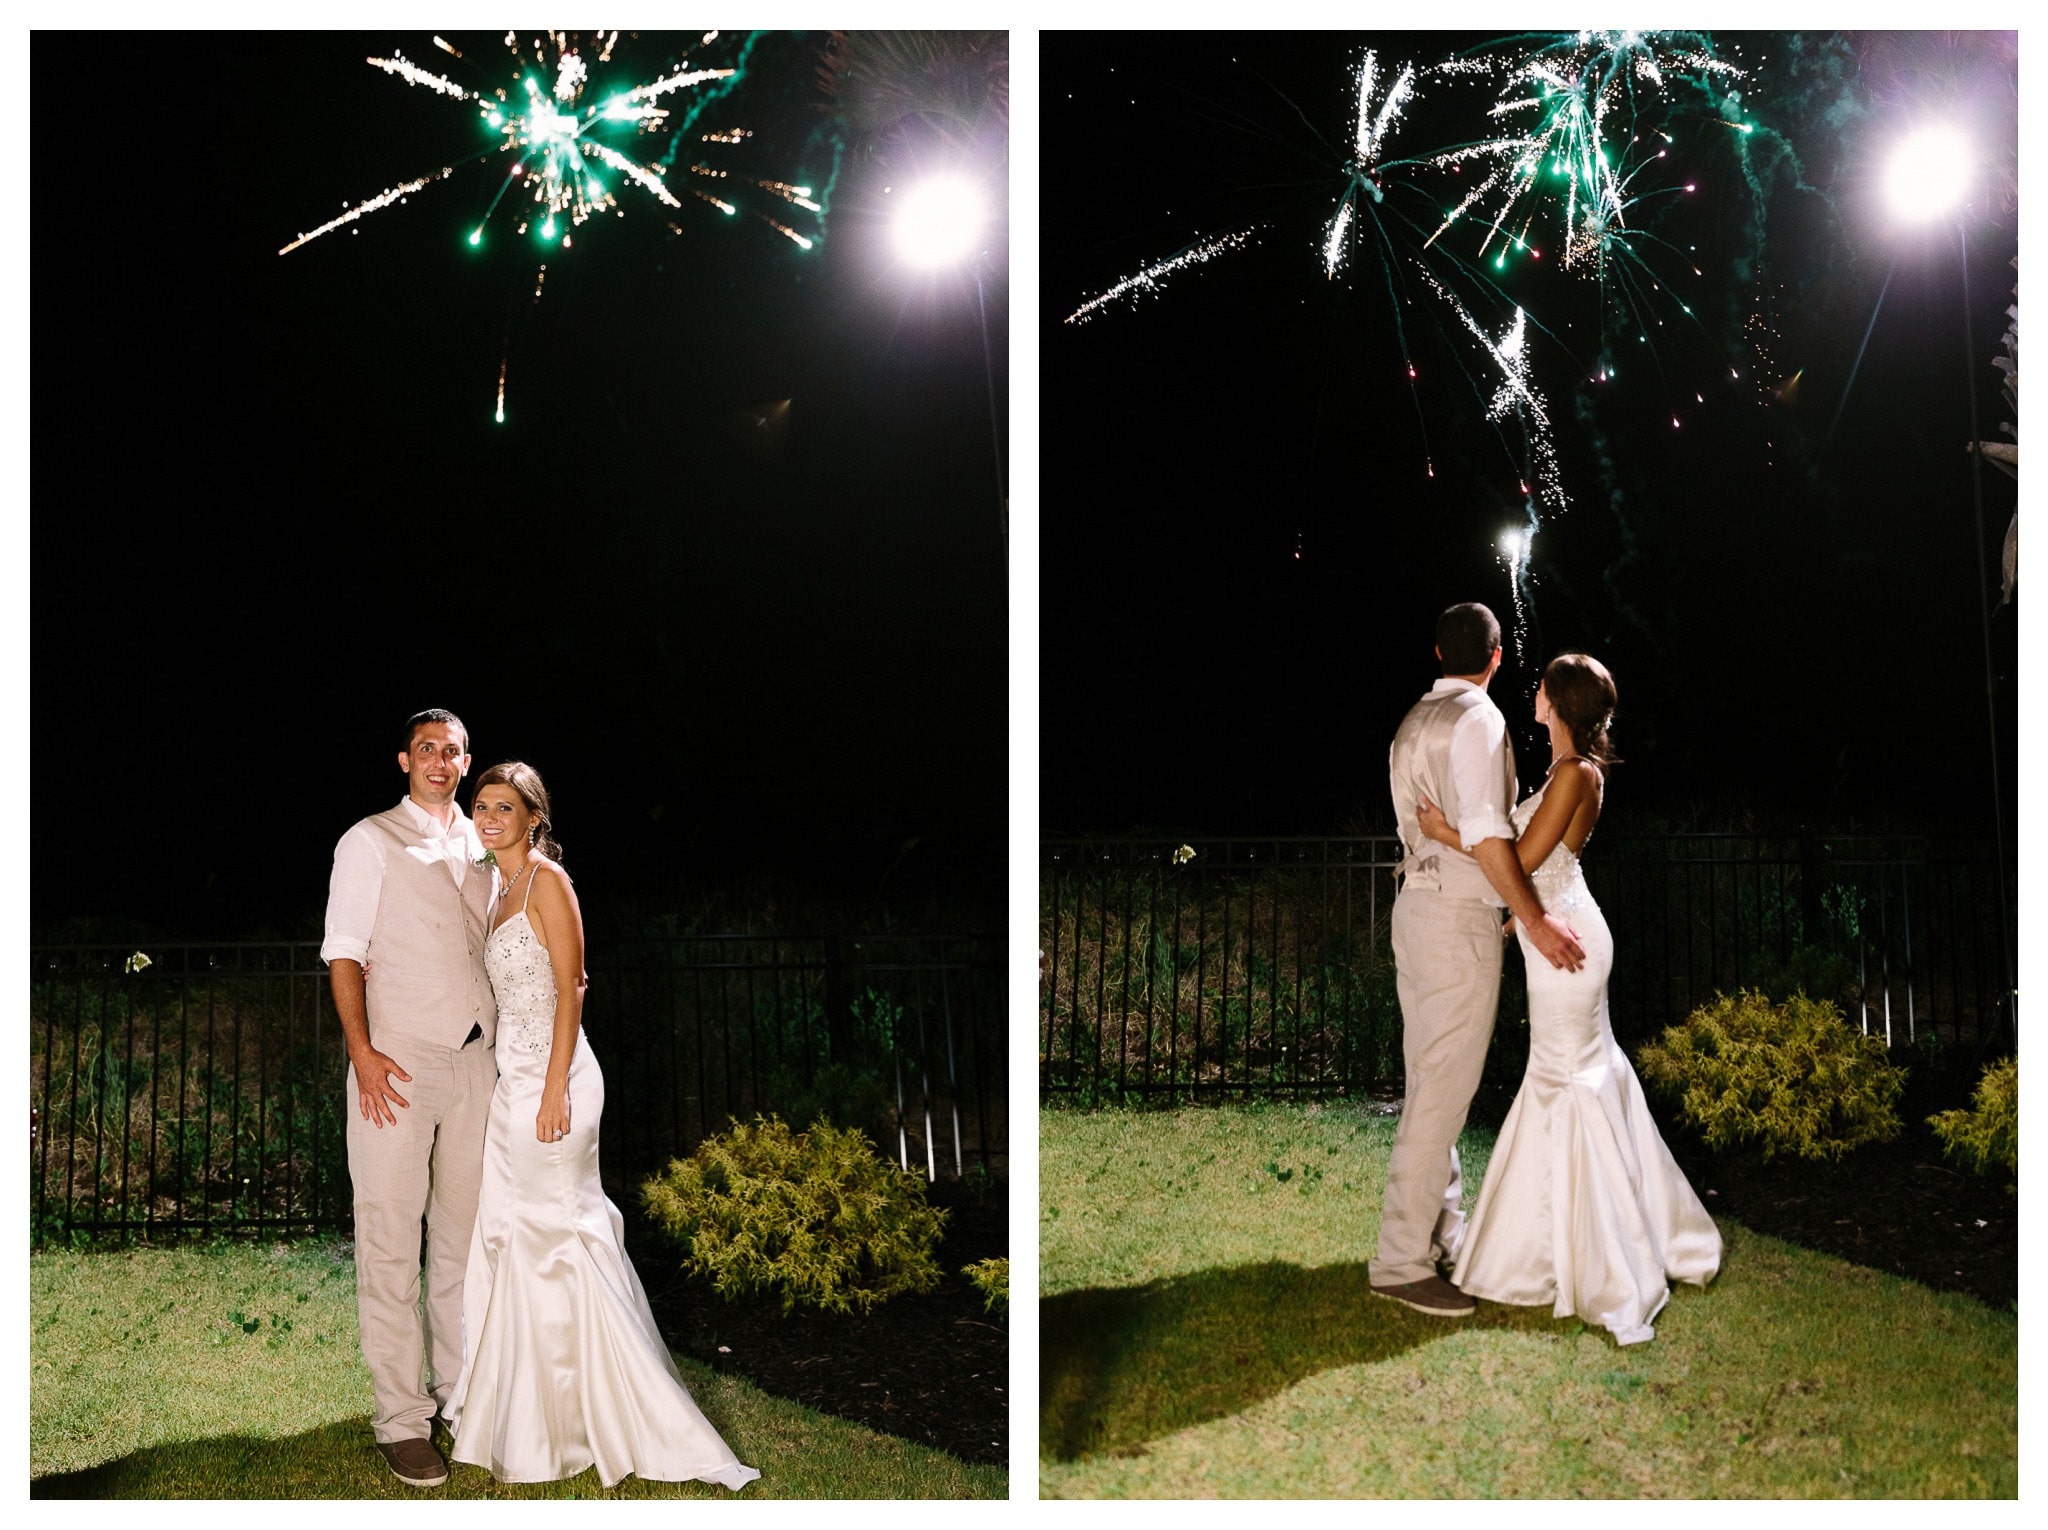 The Couple under Fireworks - Venue - Beach House Gulf Stream Breeze, Beach Realty Catering and Cake - Buttercream Cakes and Catering, LLC Flowers - Callas Florist Event Rentals - Event Works DJ - Scott Shaw